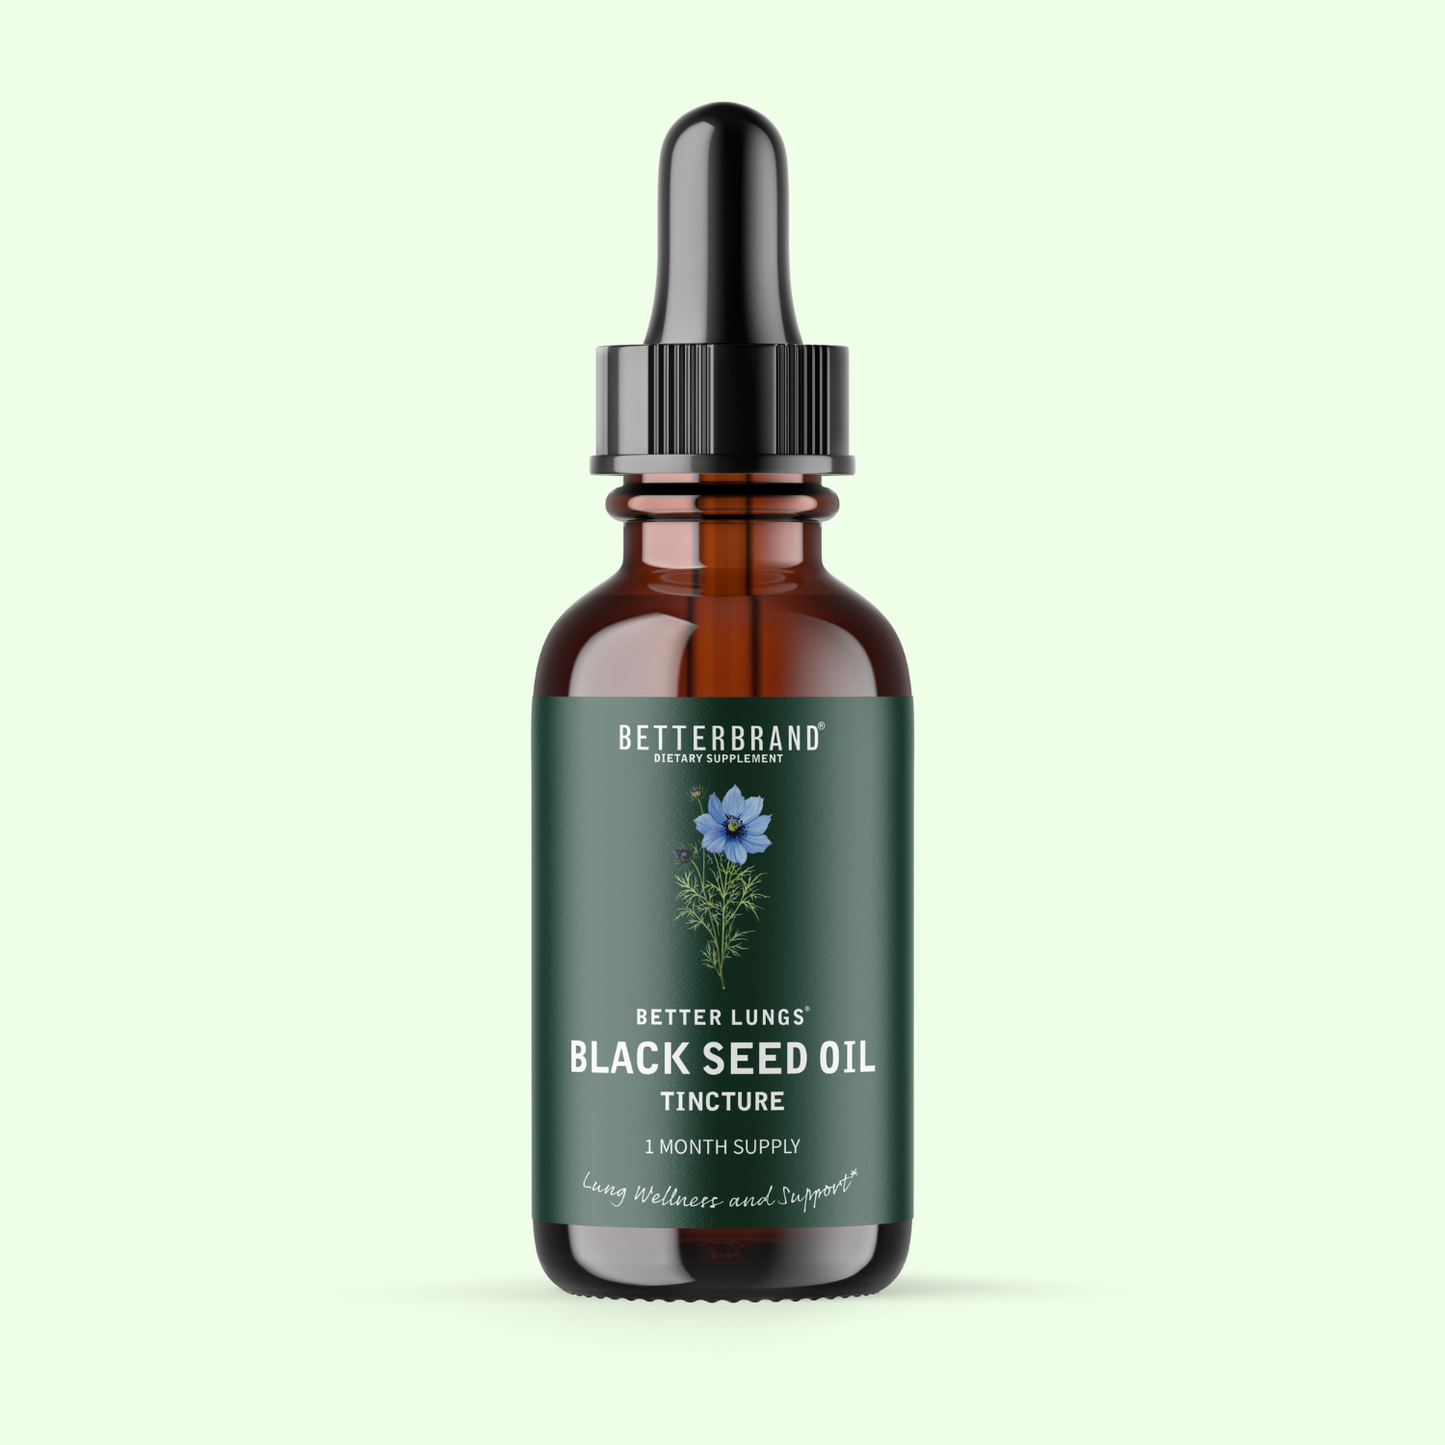 BetterLungs® Black Seed Oil Tincture - Betterbrand